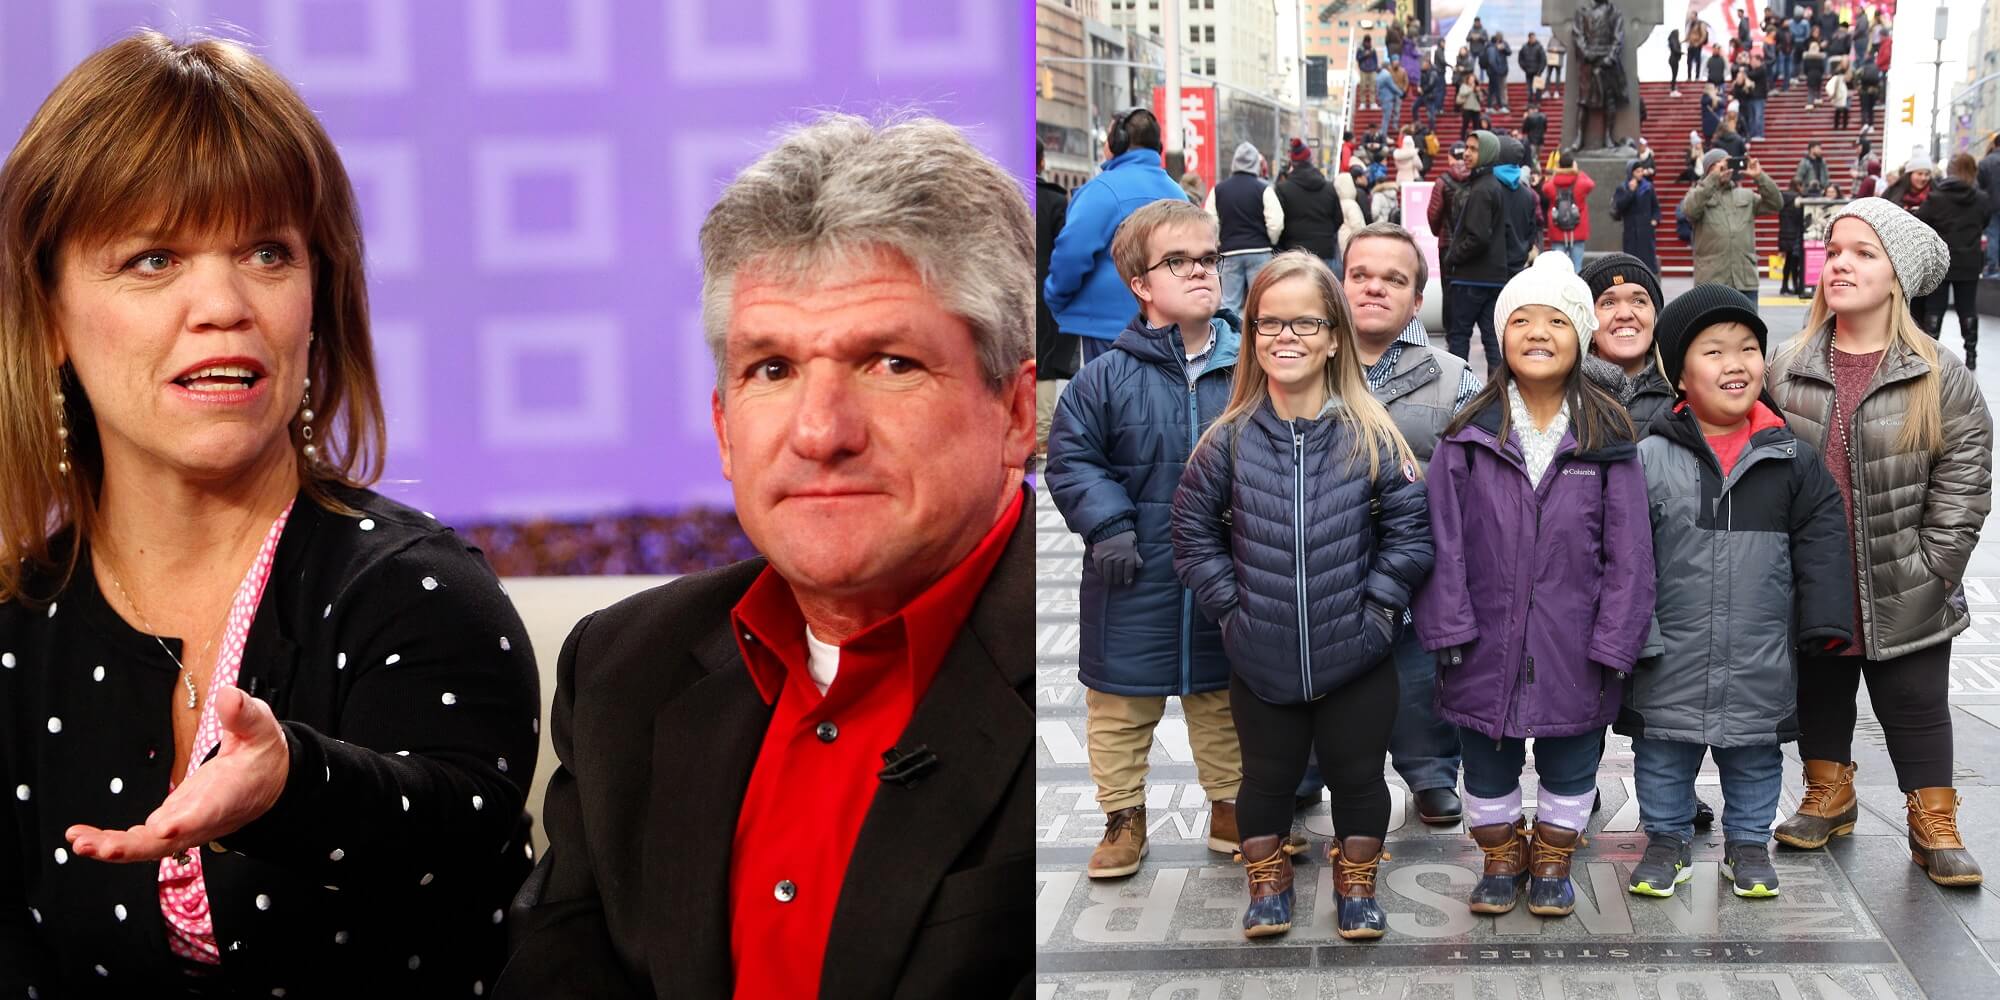 A joined photo of Amy Roloff and Matt Roloff from 'Little People, Big World' and the cast of '7 Little Johnstons'